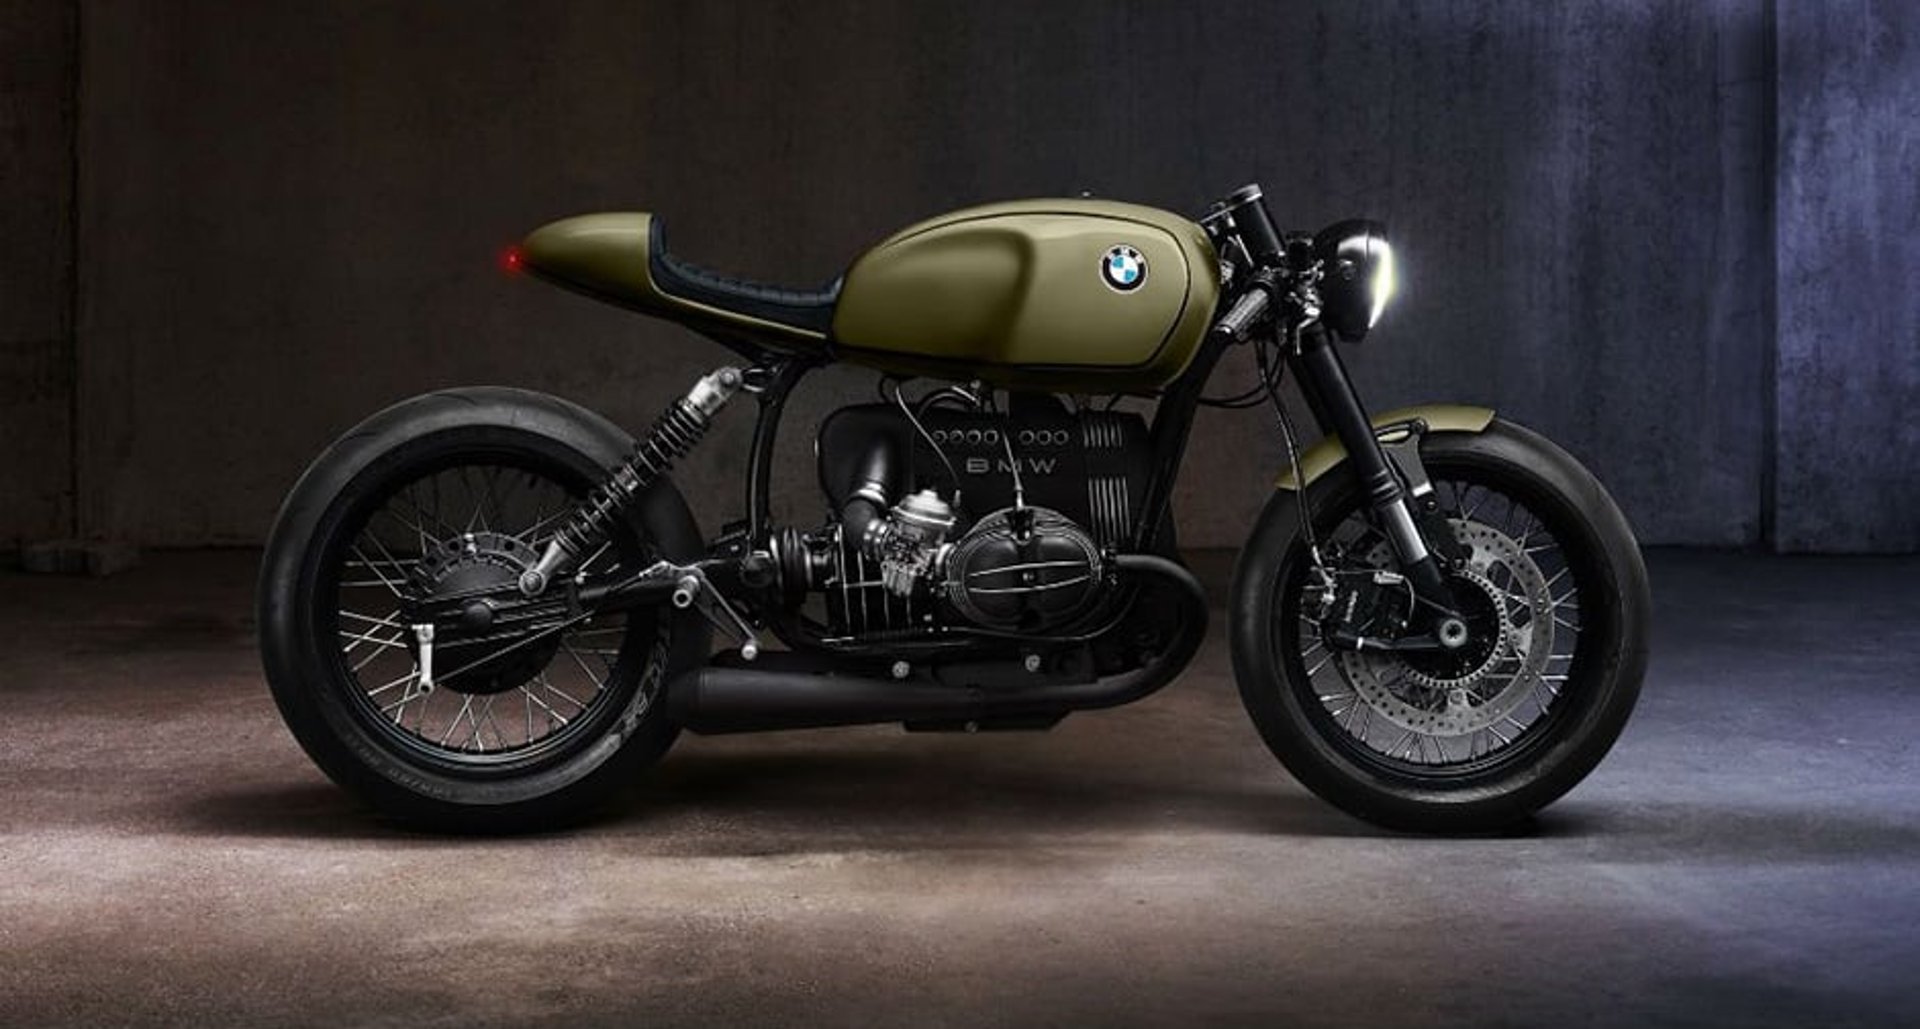 As café racers go, this BMW is a diamond in the rough